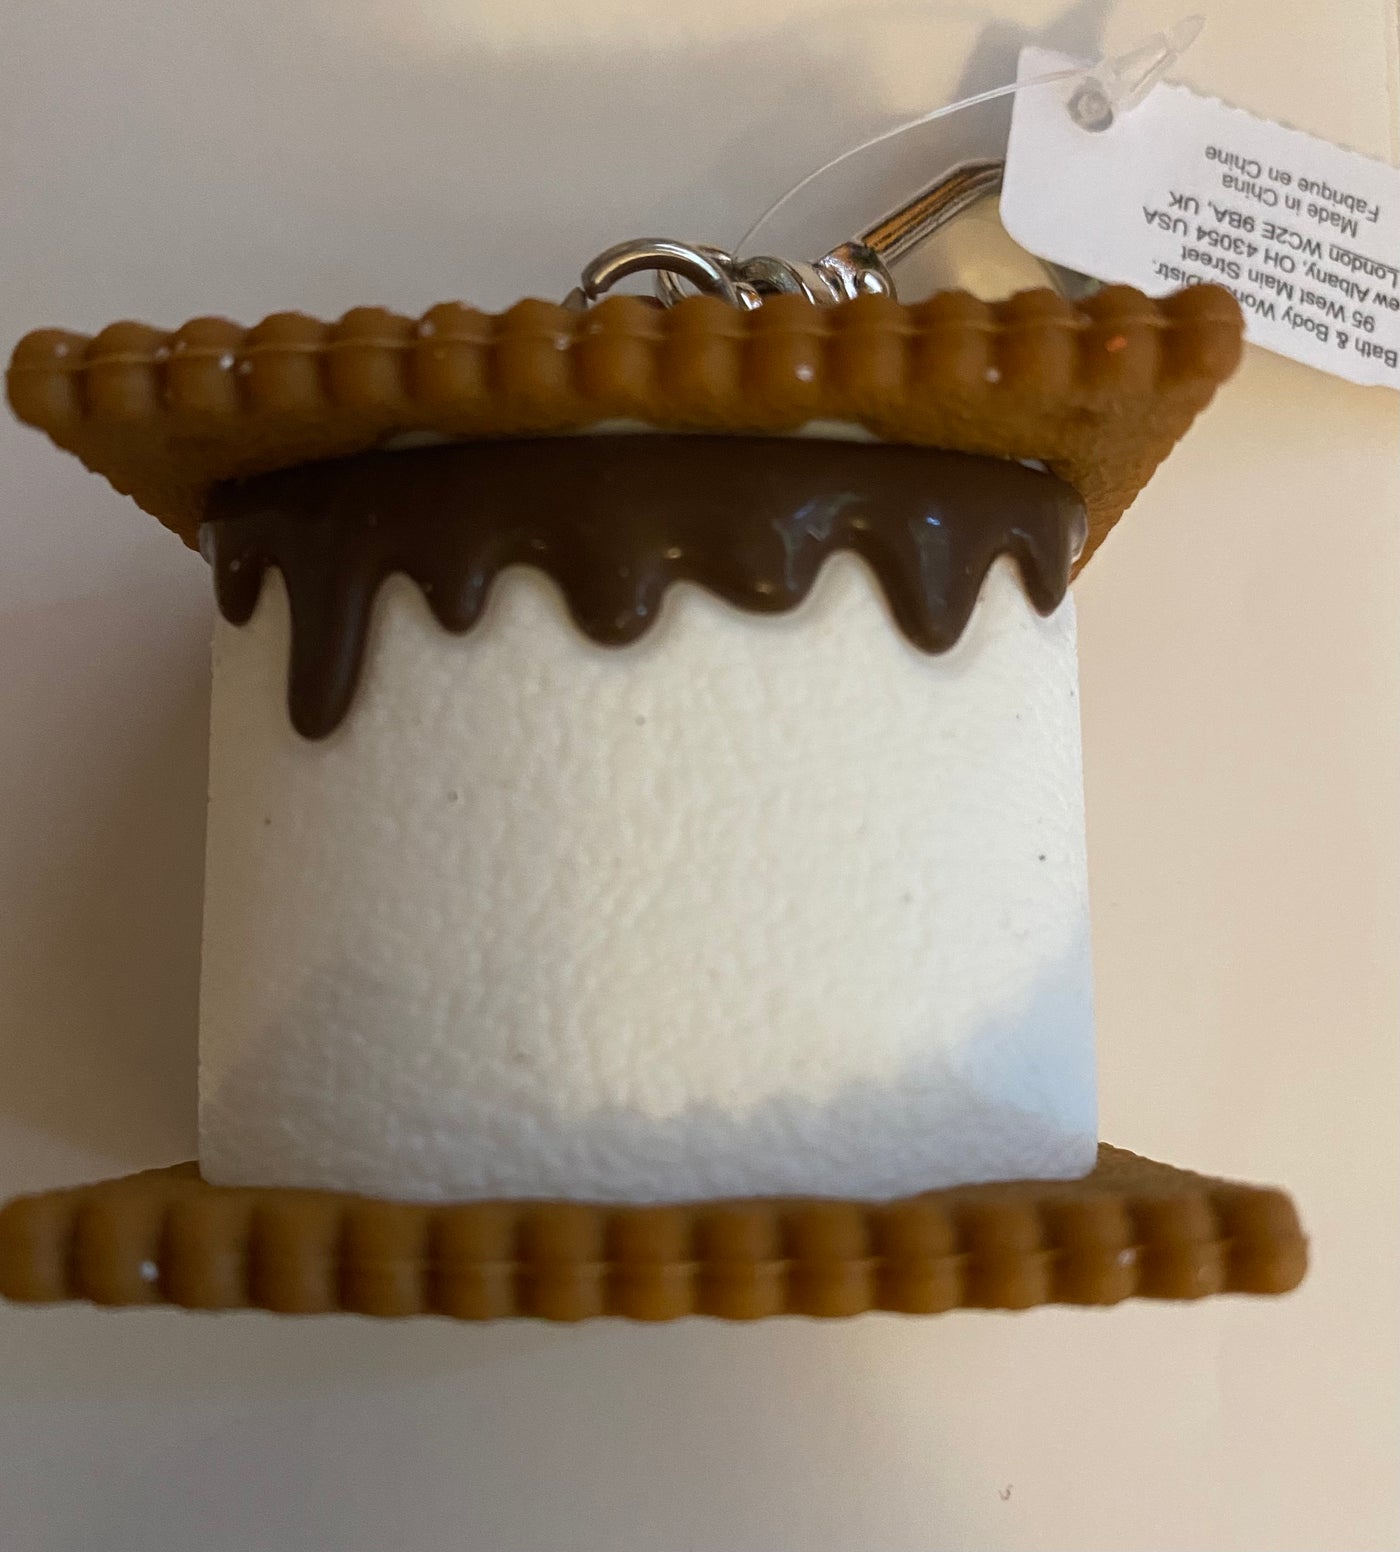 Bath and Body Works S'mores Smores Marshmallow Pocket* Bac Holder Keychain New